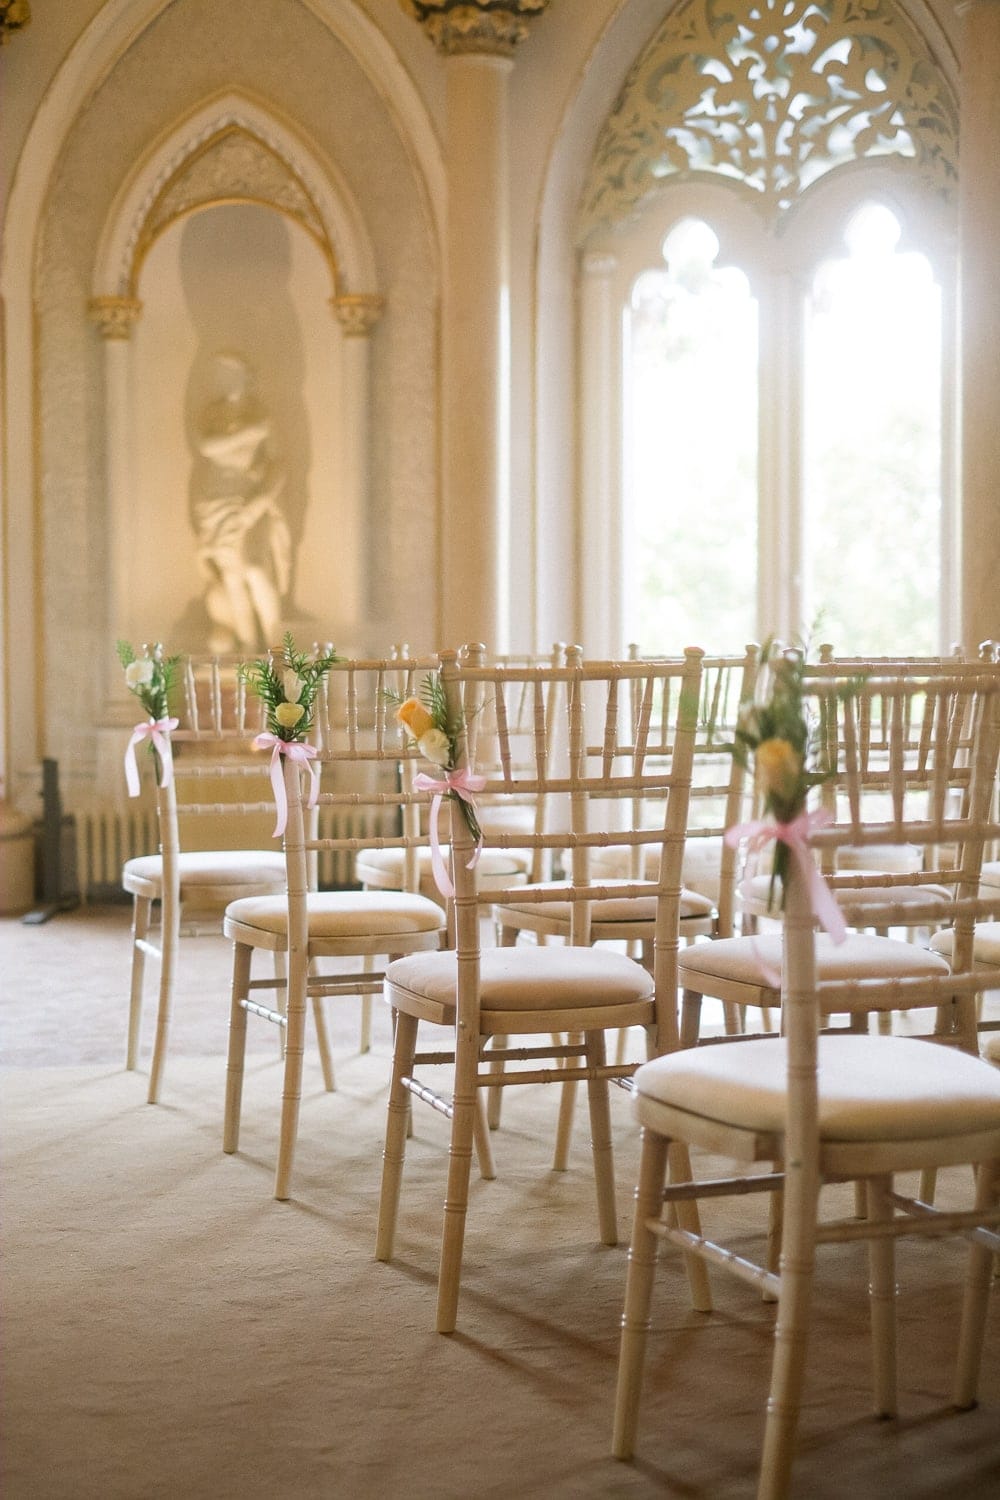 flower decoration on chairs during an American wedding at Monserrate Palace in Sintra